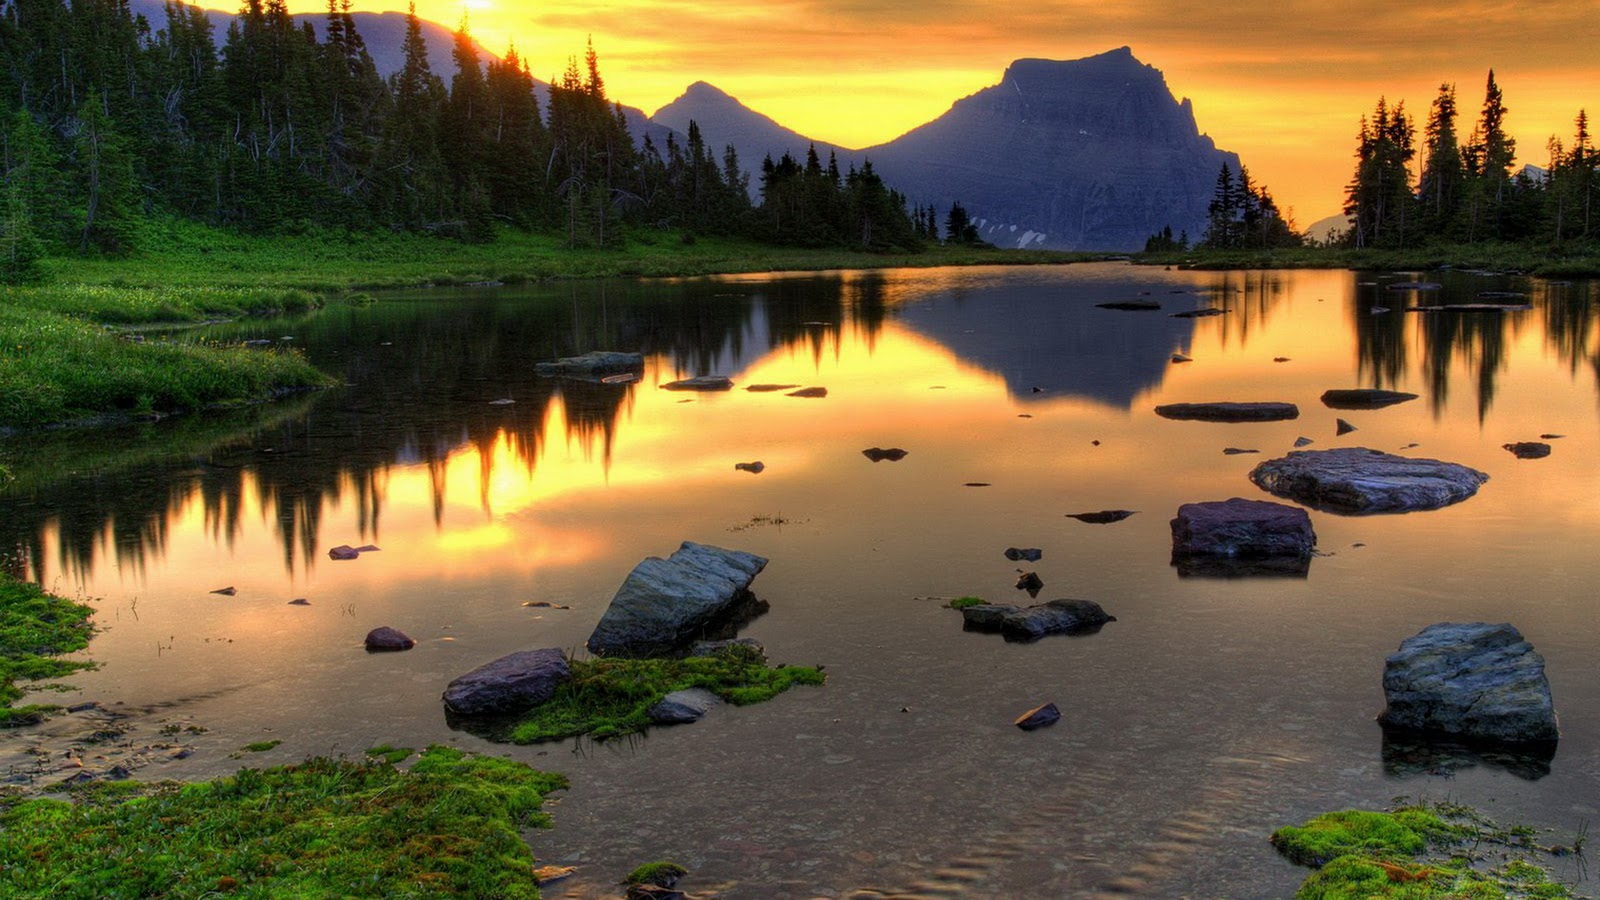 Sunset Pictures Of Mountains And Lakes